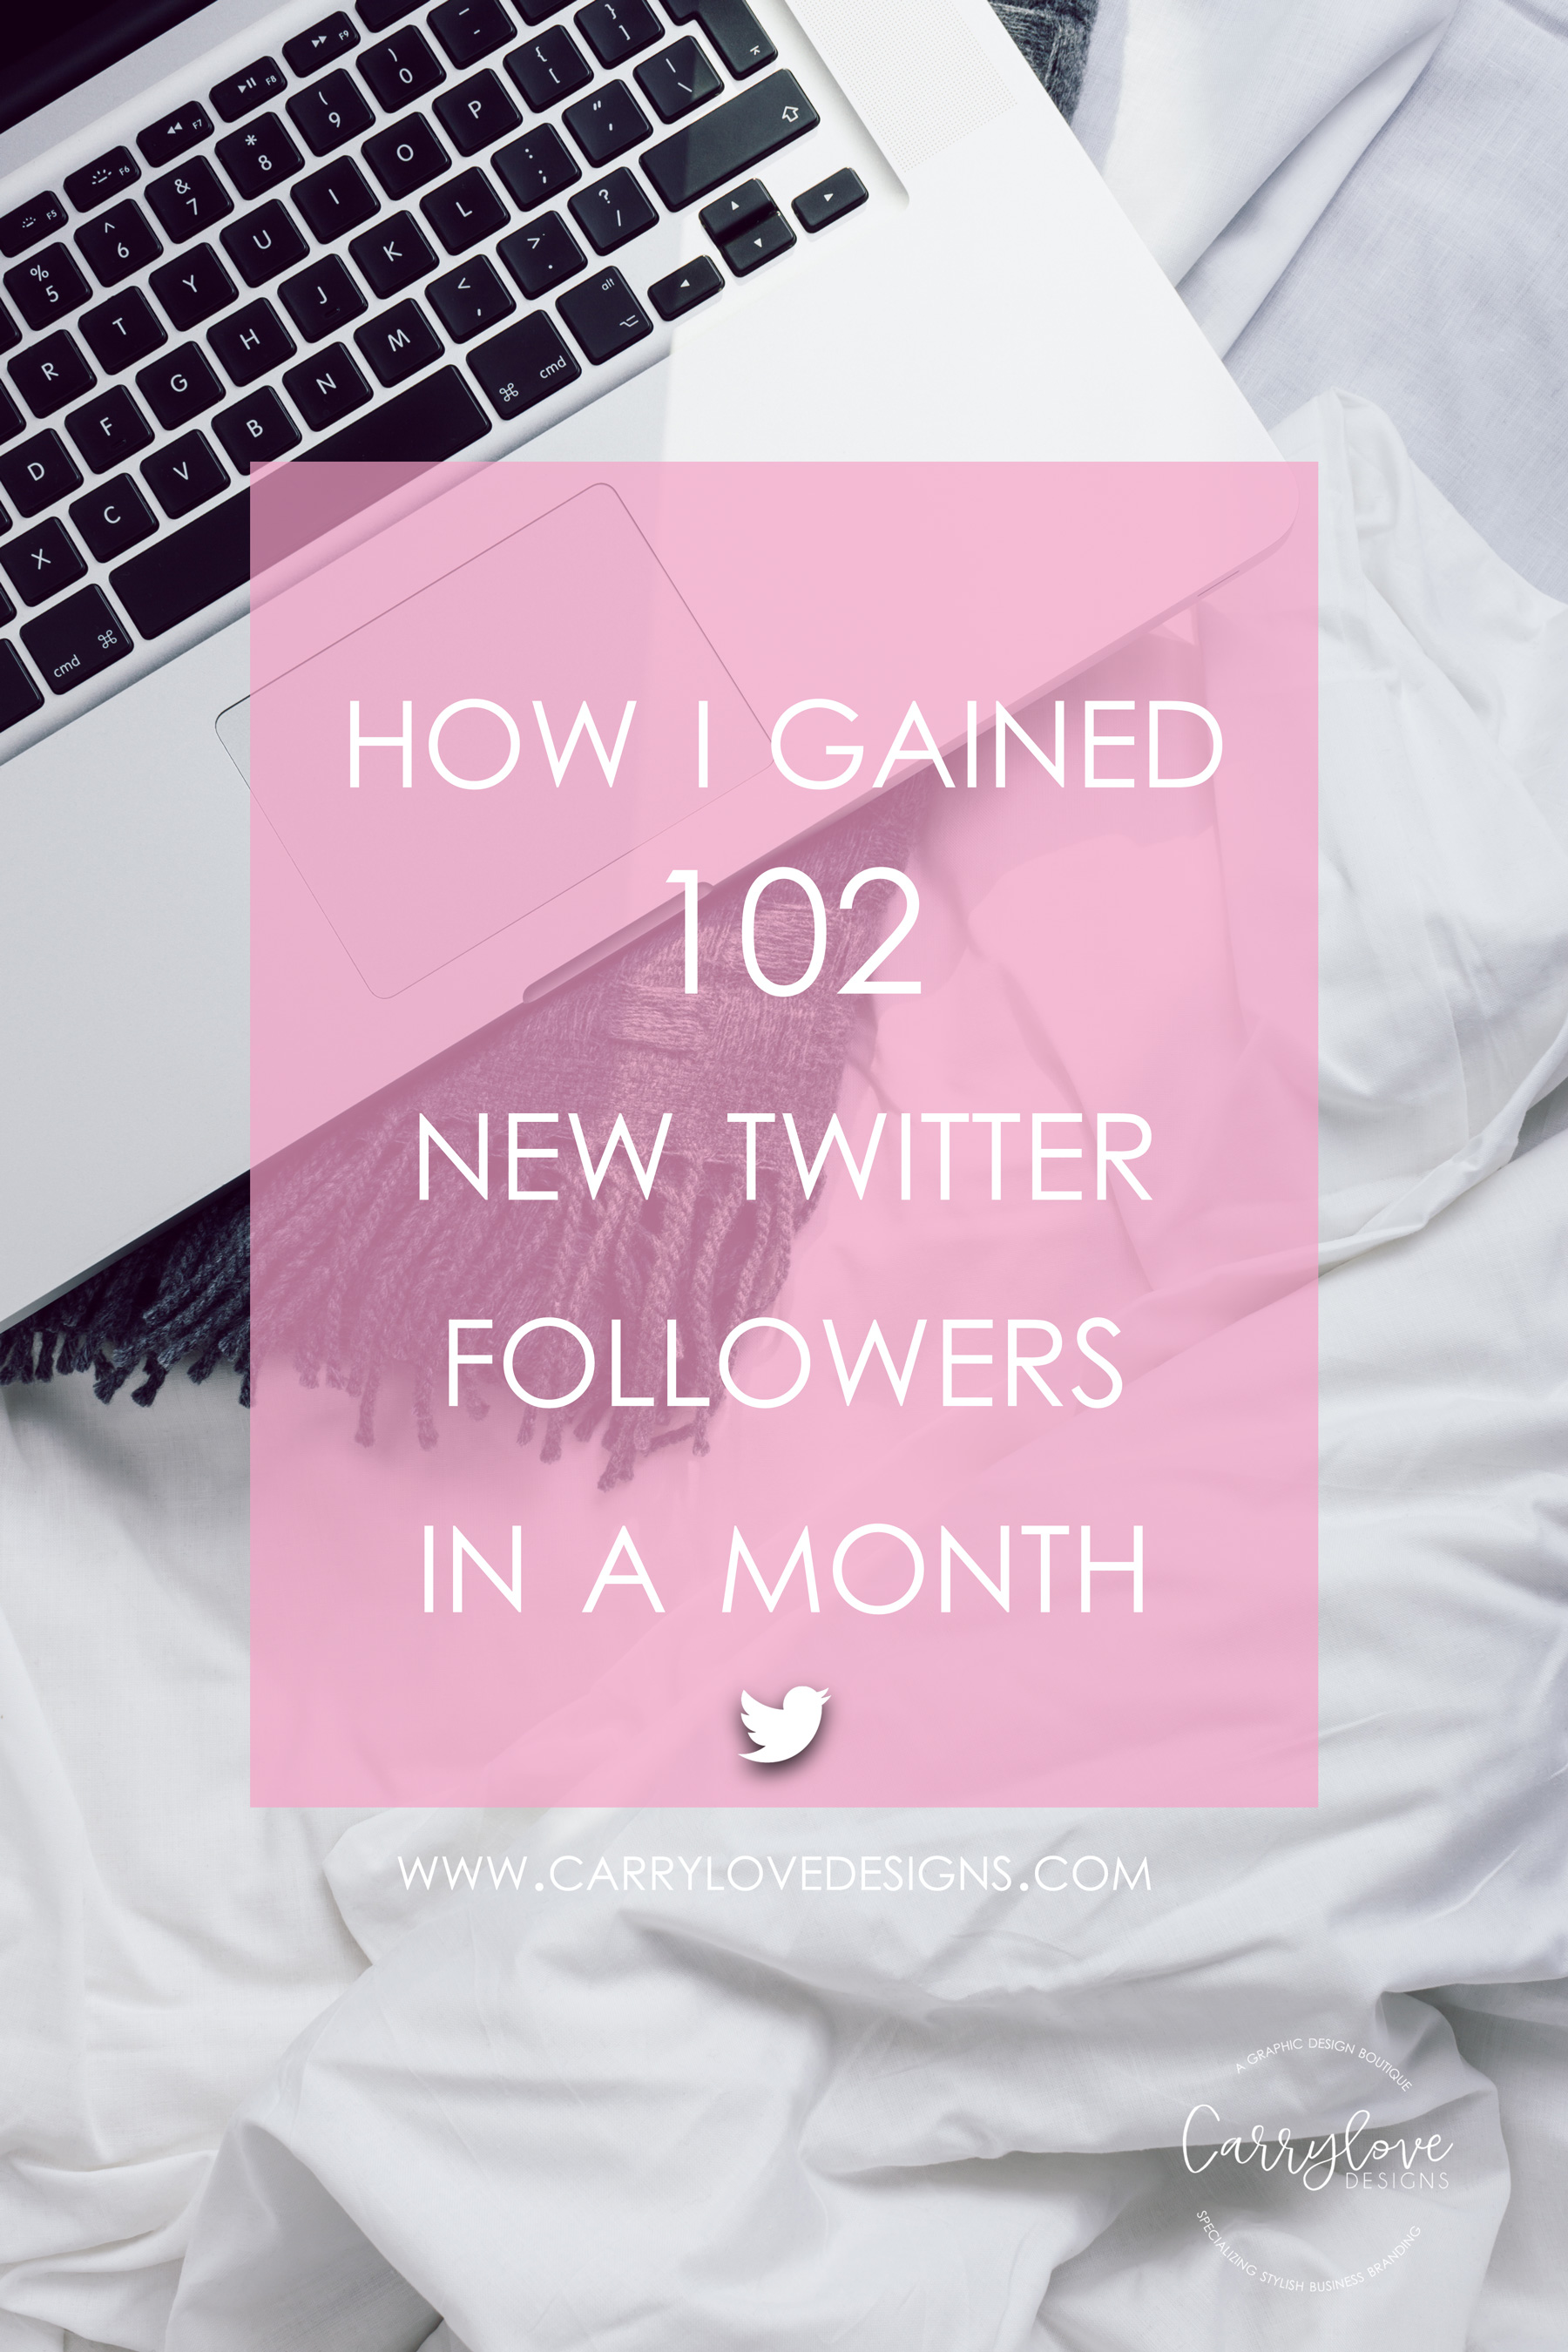 How-I-Gained-102-New-Twitter-Followers-In-a-Month-Display